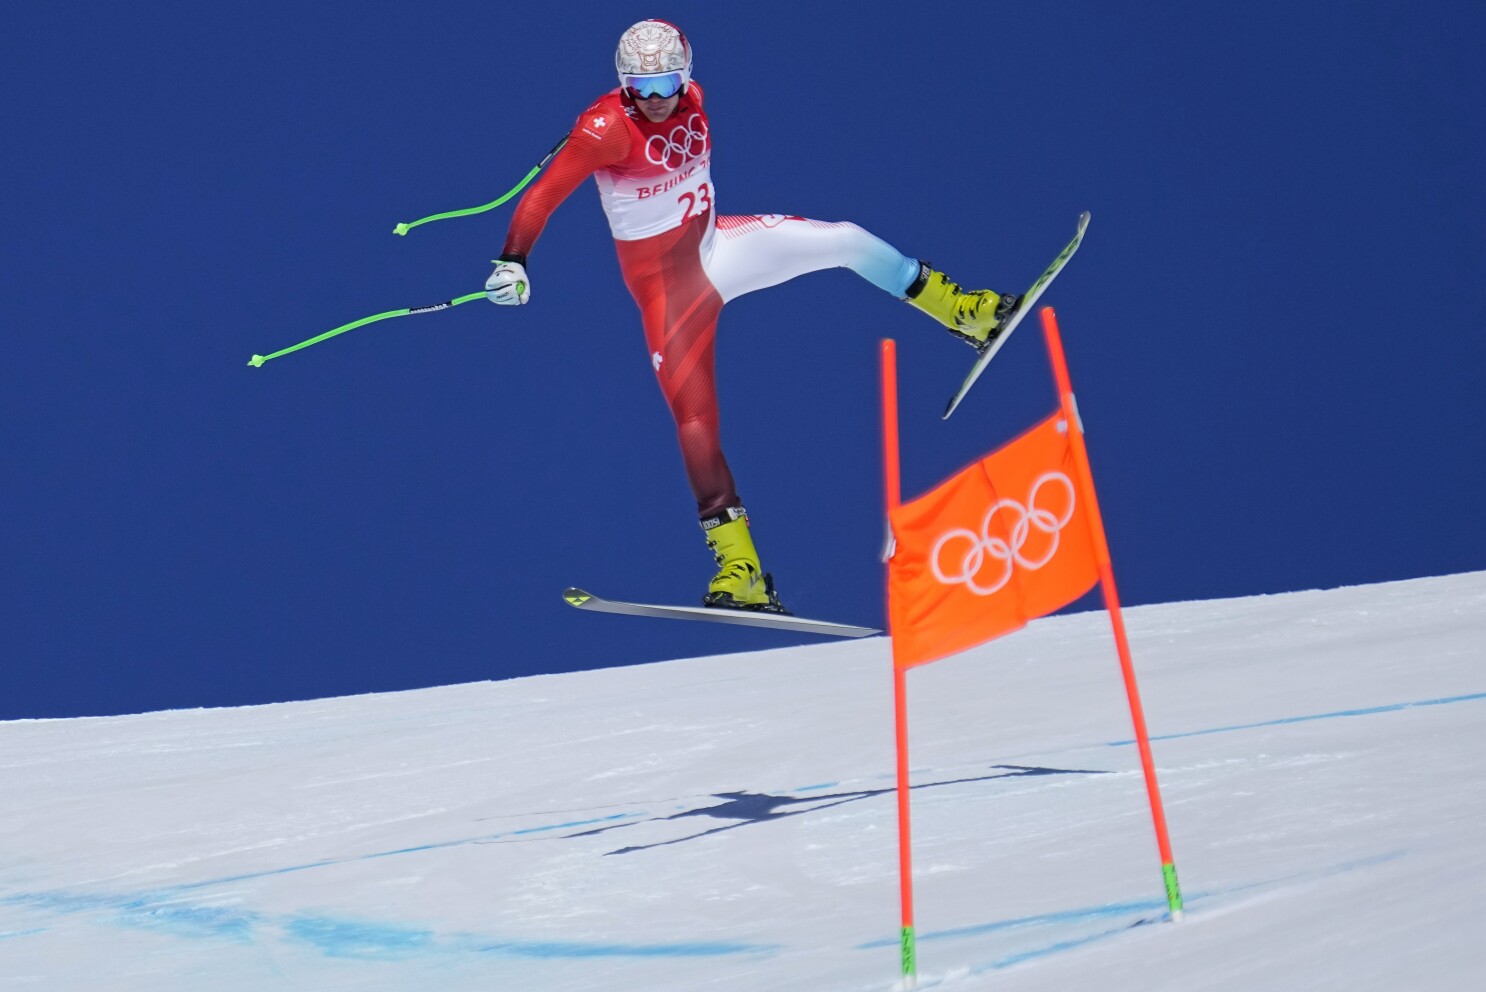 Olympic 2022 The downhill skier was 'blocked the way' by BTC staff to the finish line